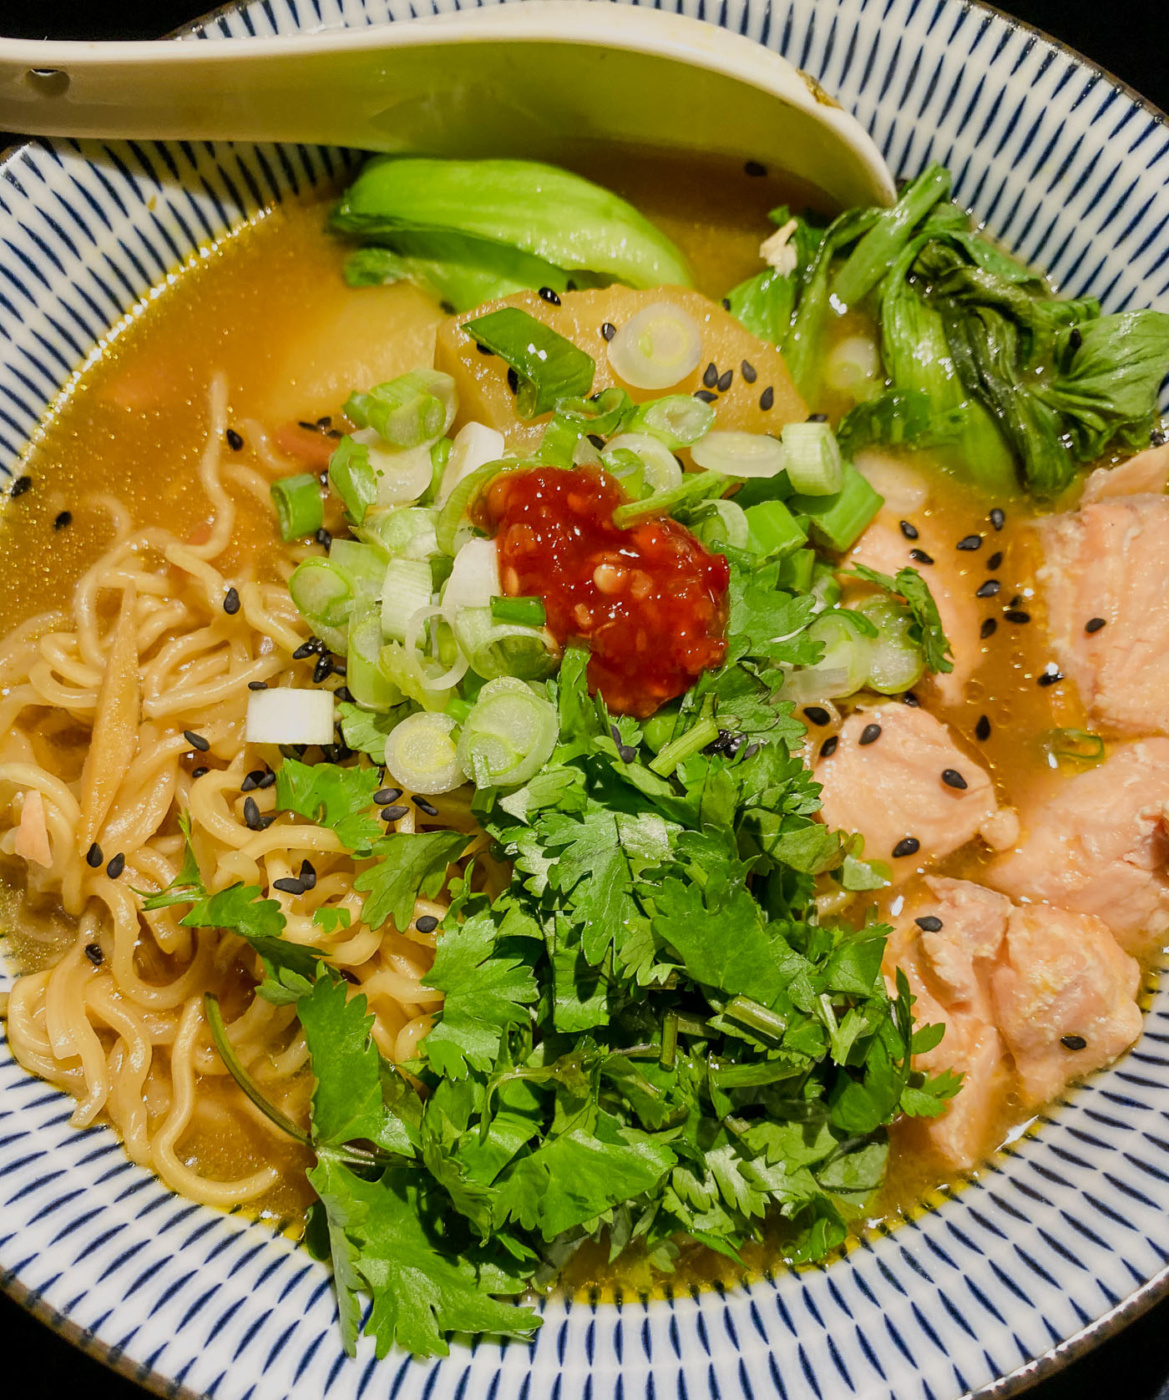 I like to add all kind of stuff in my ramen. Here's a new spin with salmon, potatoes and arugula.